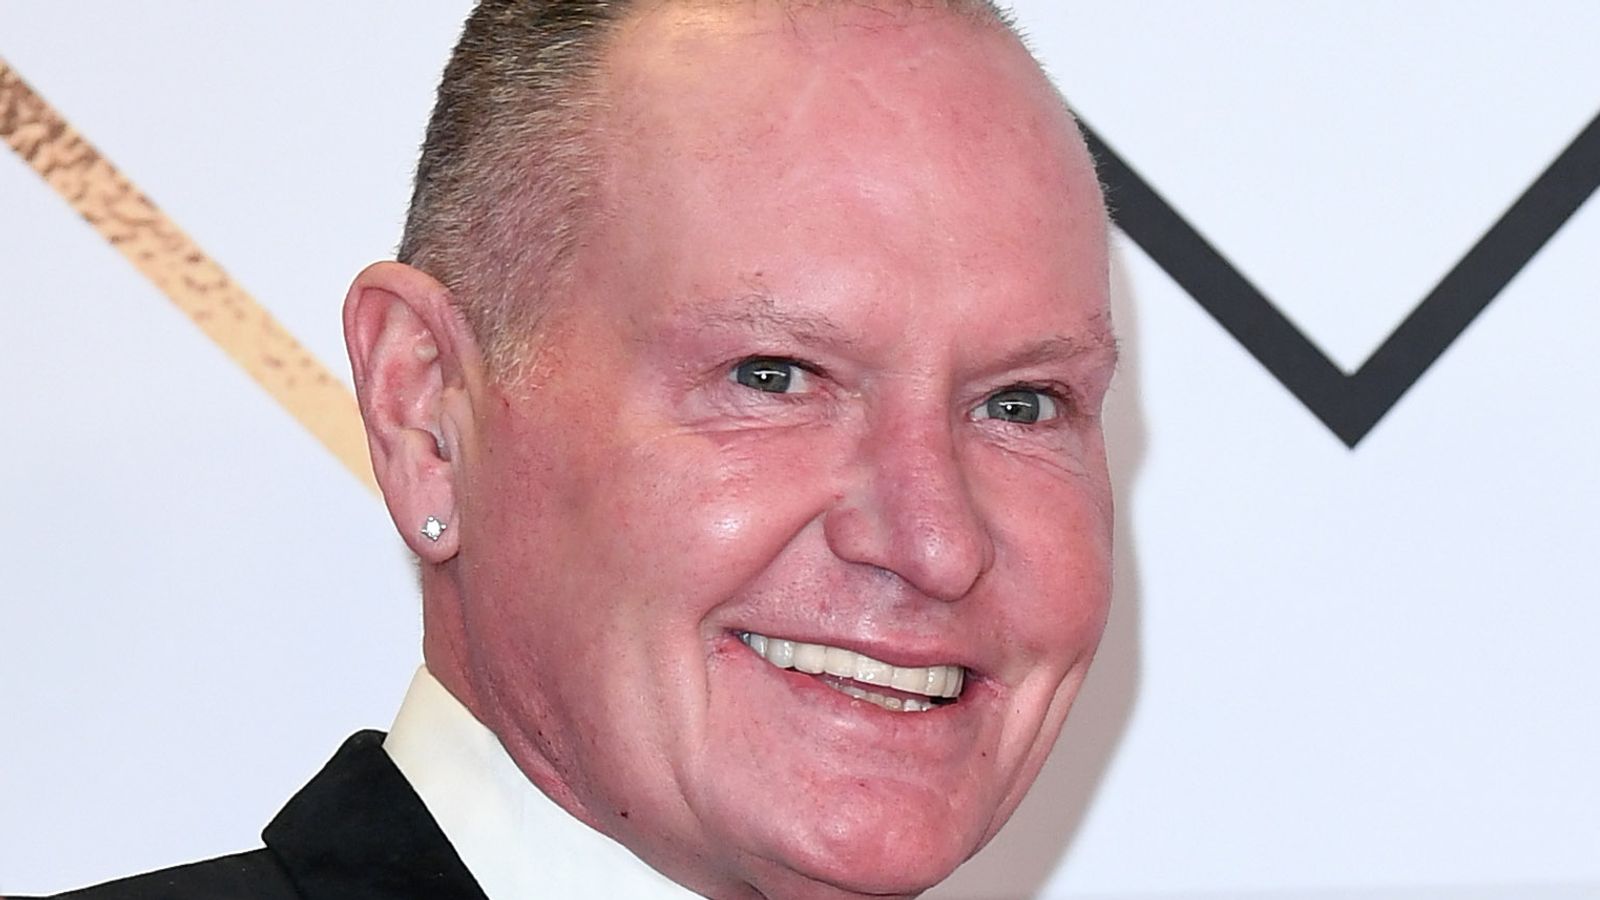 Gascoigne: I know I'm happier when I'm not drinking, I can